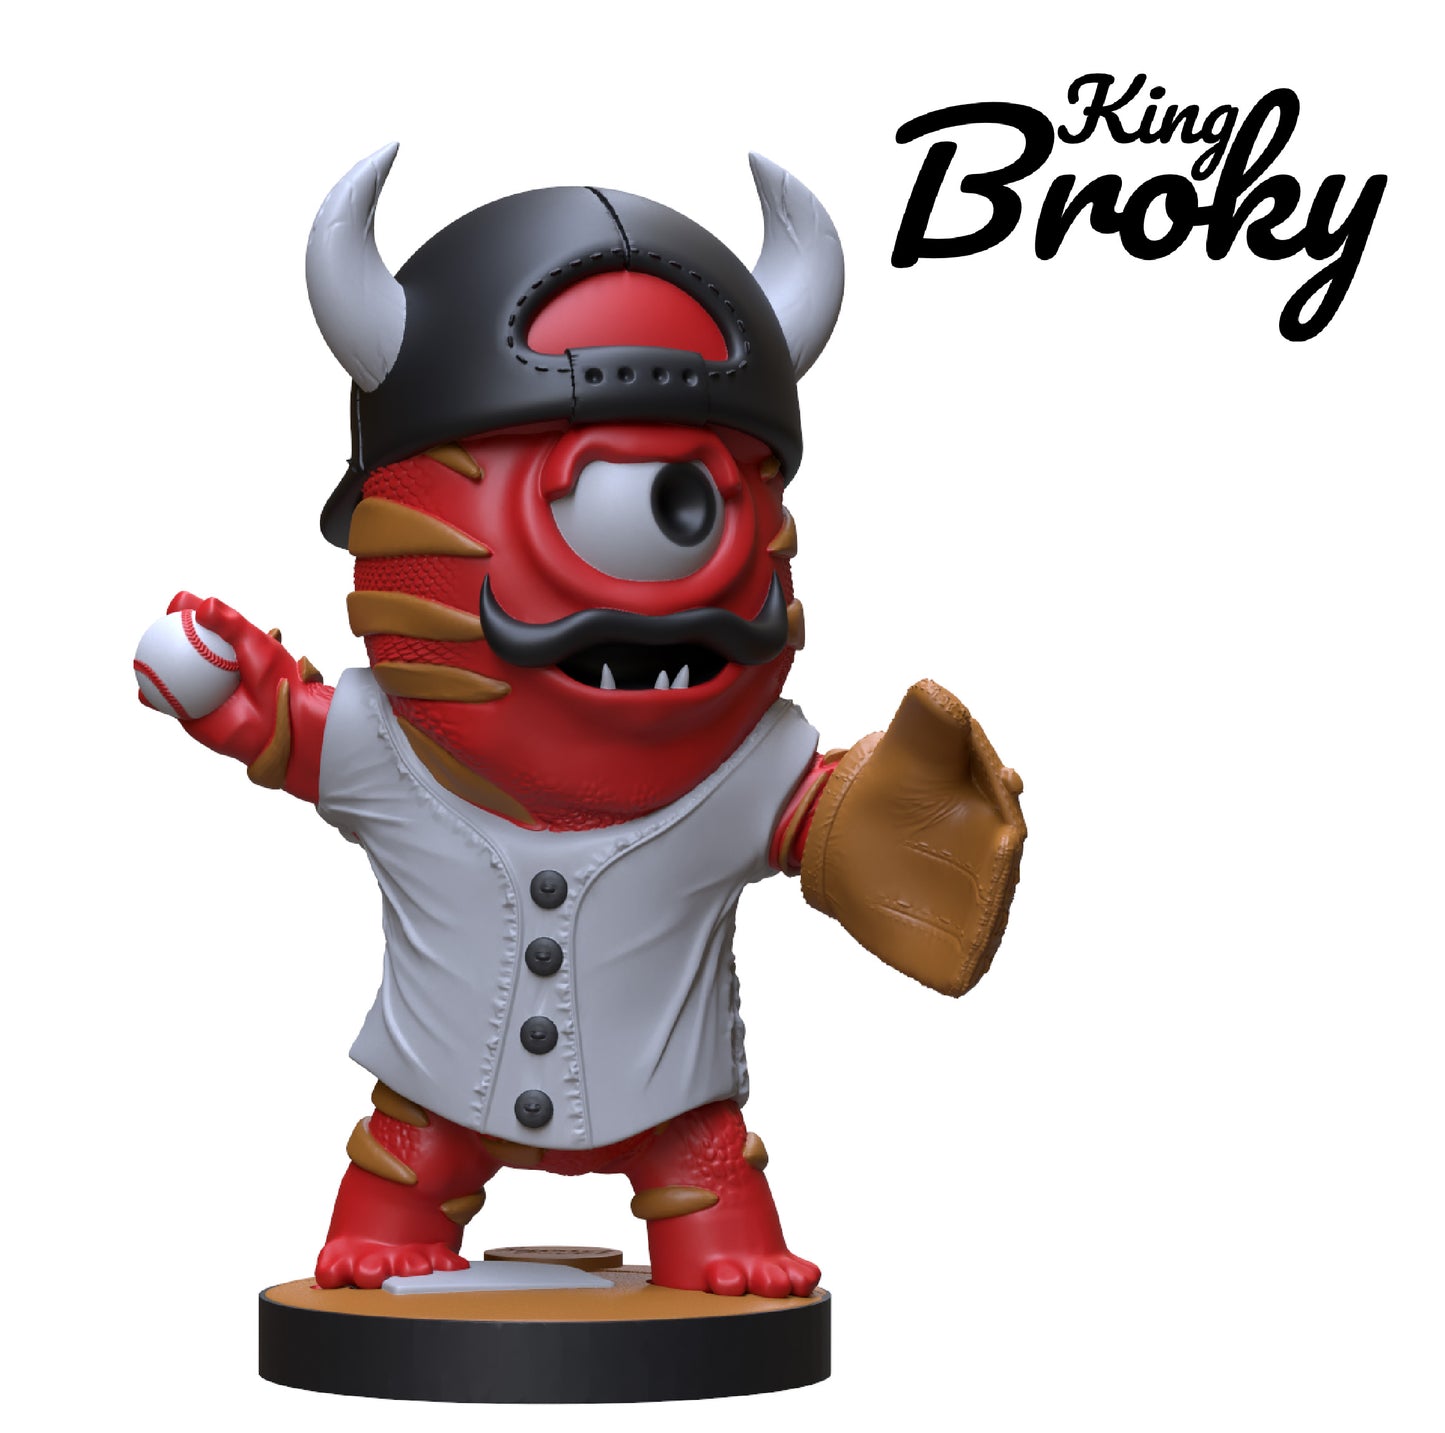 BT5 KING BROKY Character for FunMouse